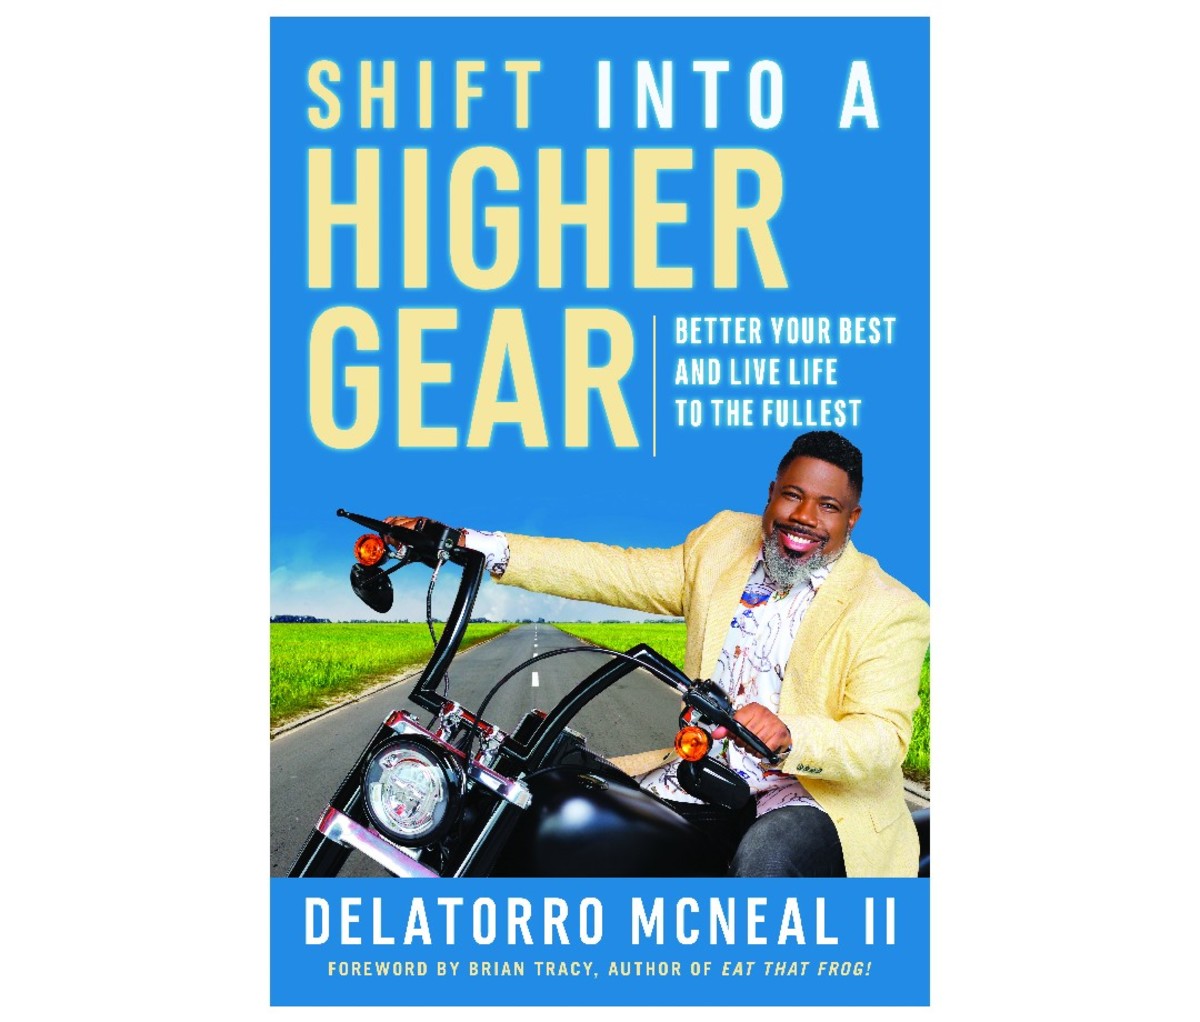 Shift into a Higher Gear: Better Your Best and Live Life to the Fullest by Delatorro McNeal